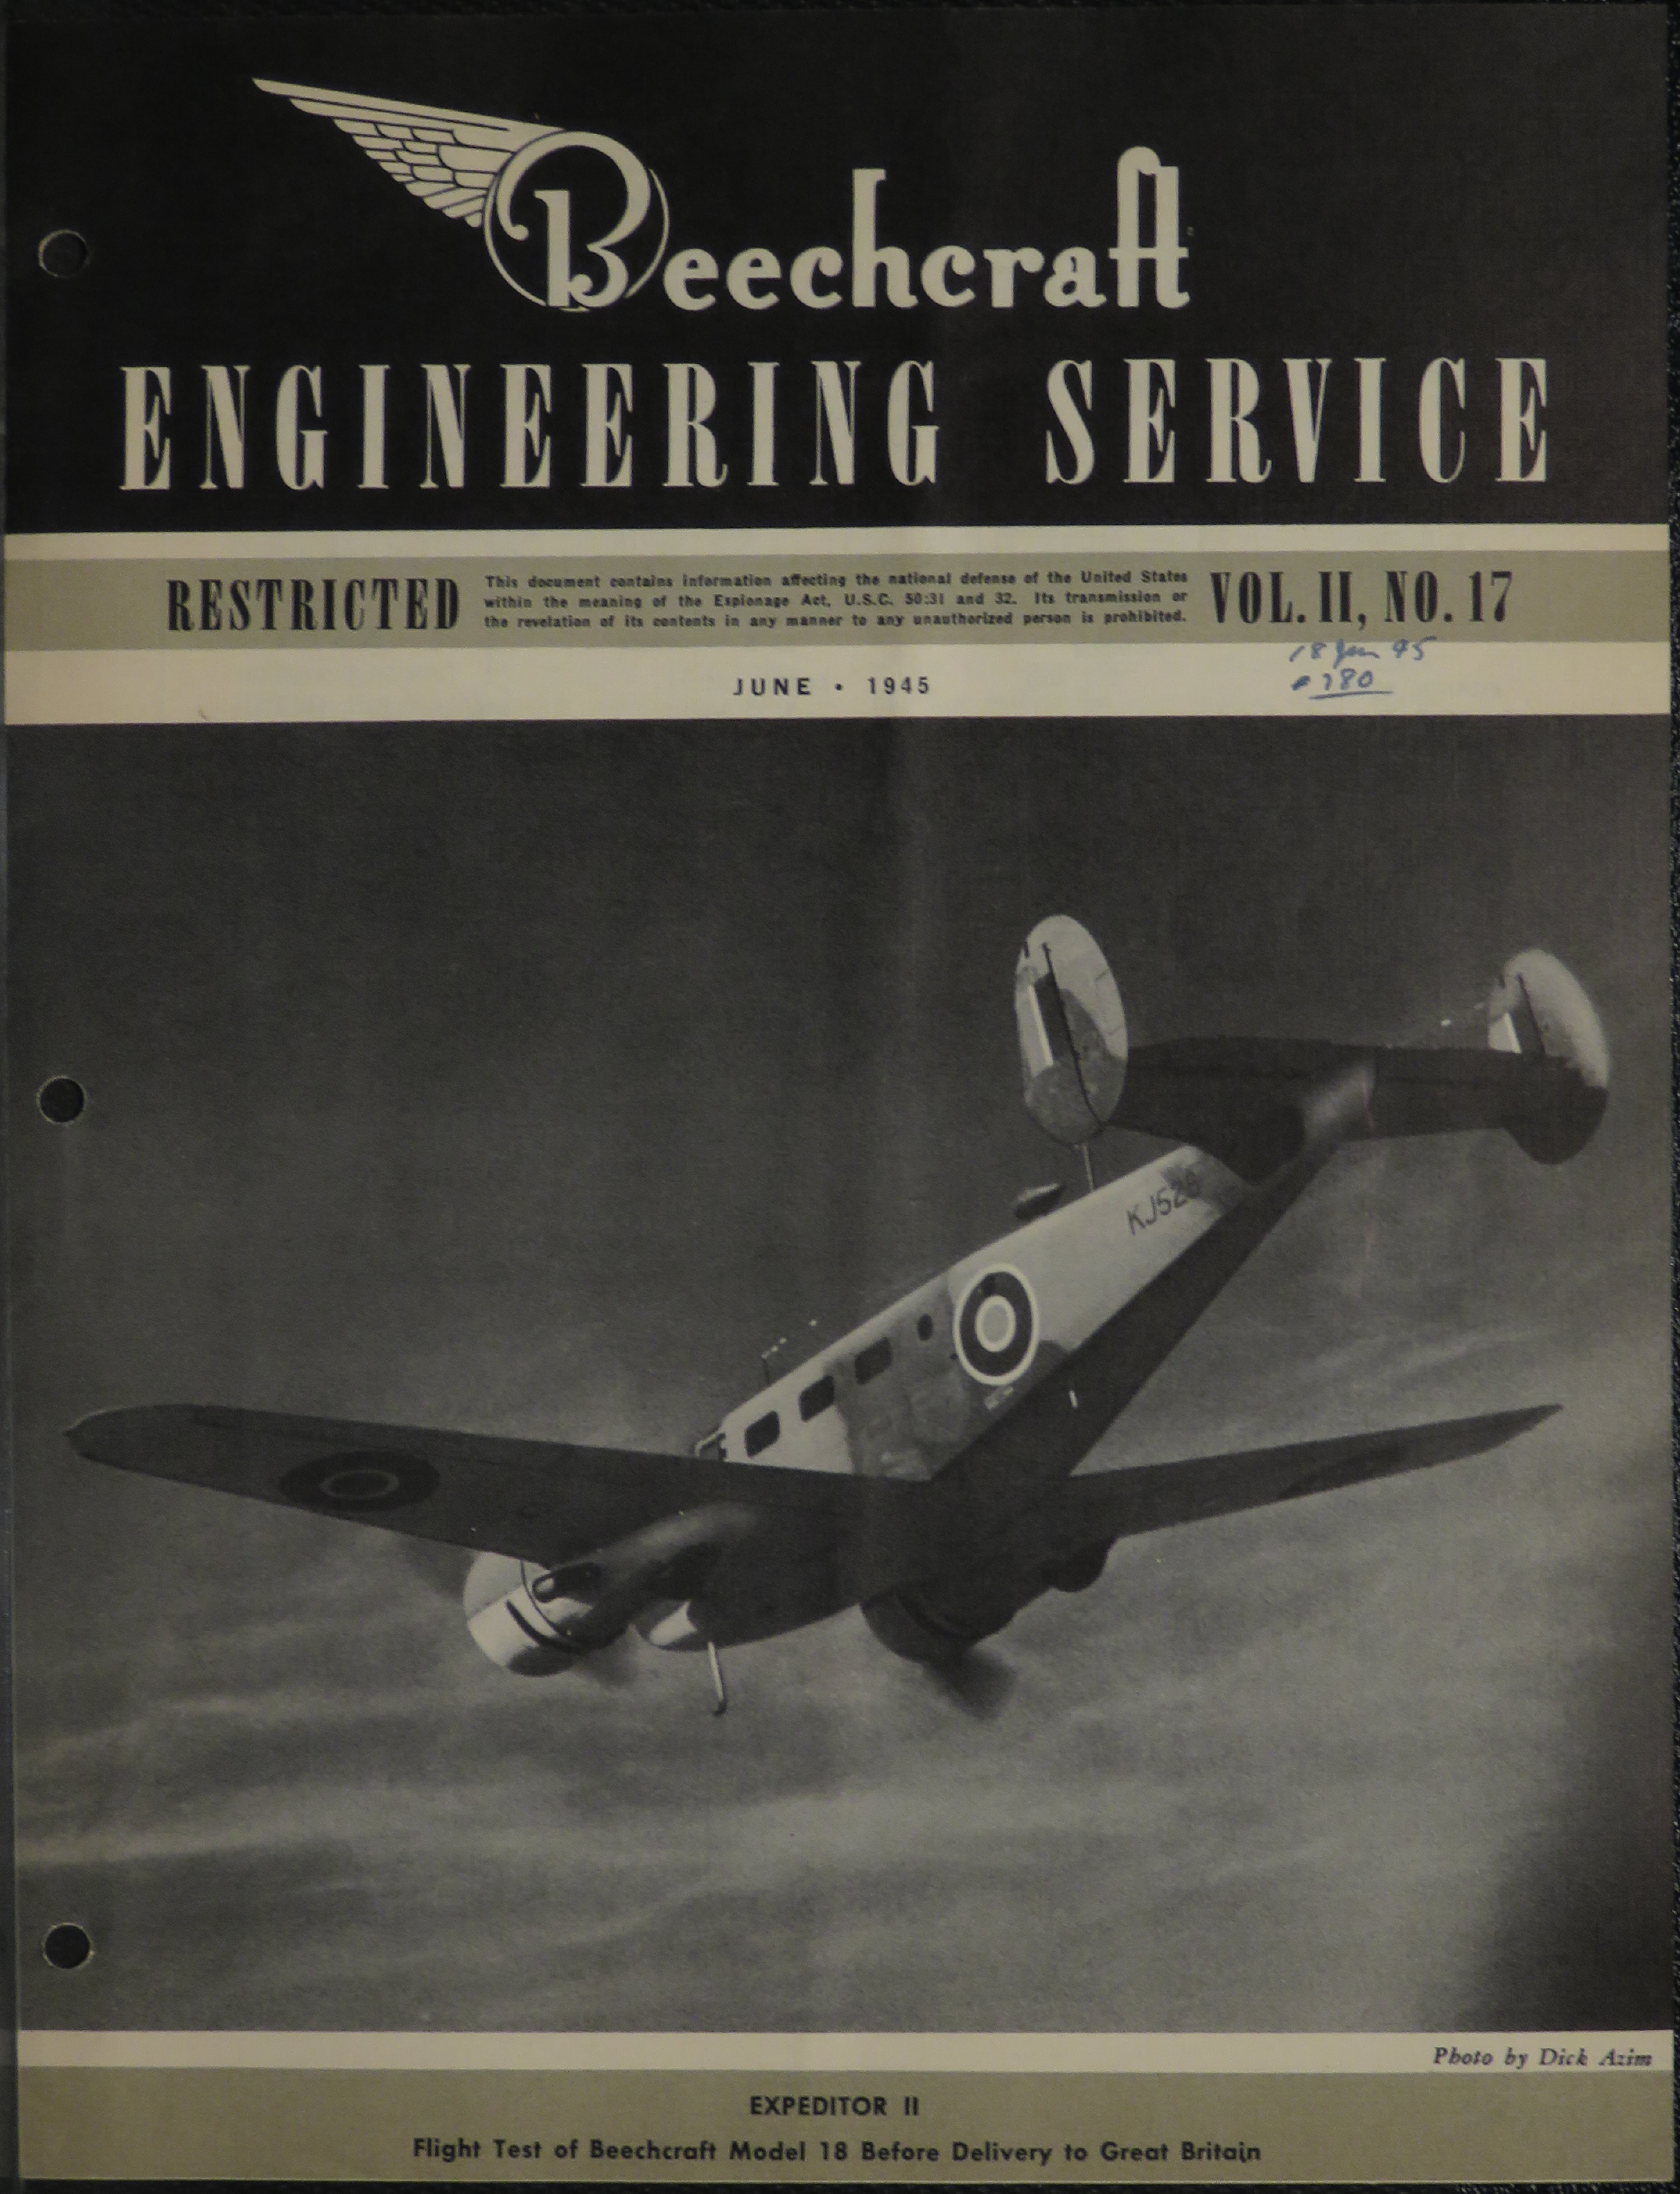 Sample page 1 from AirCorps Library document: Vol. II, No. 17 - Beechcraft Engineering Service